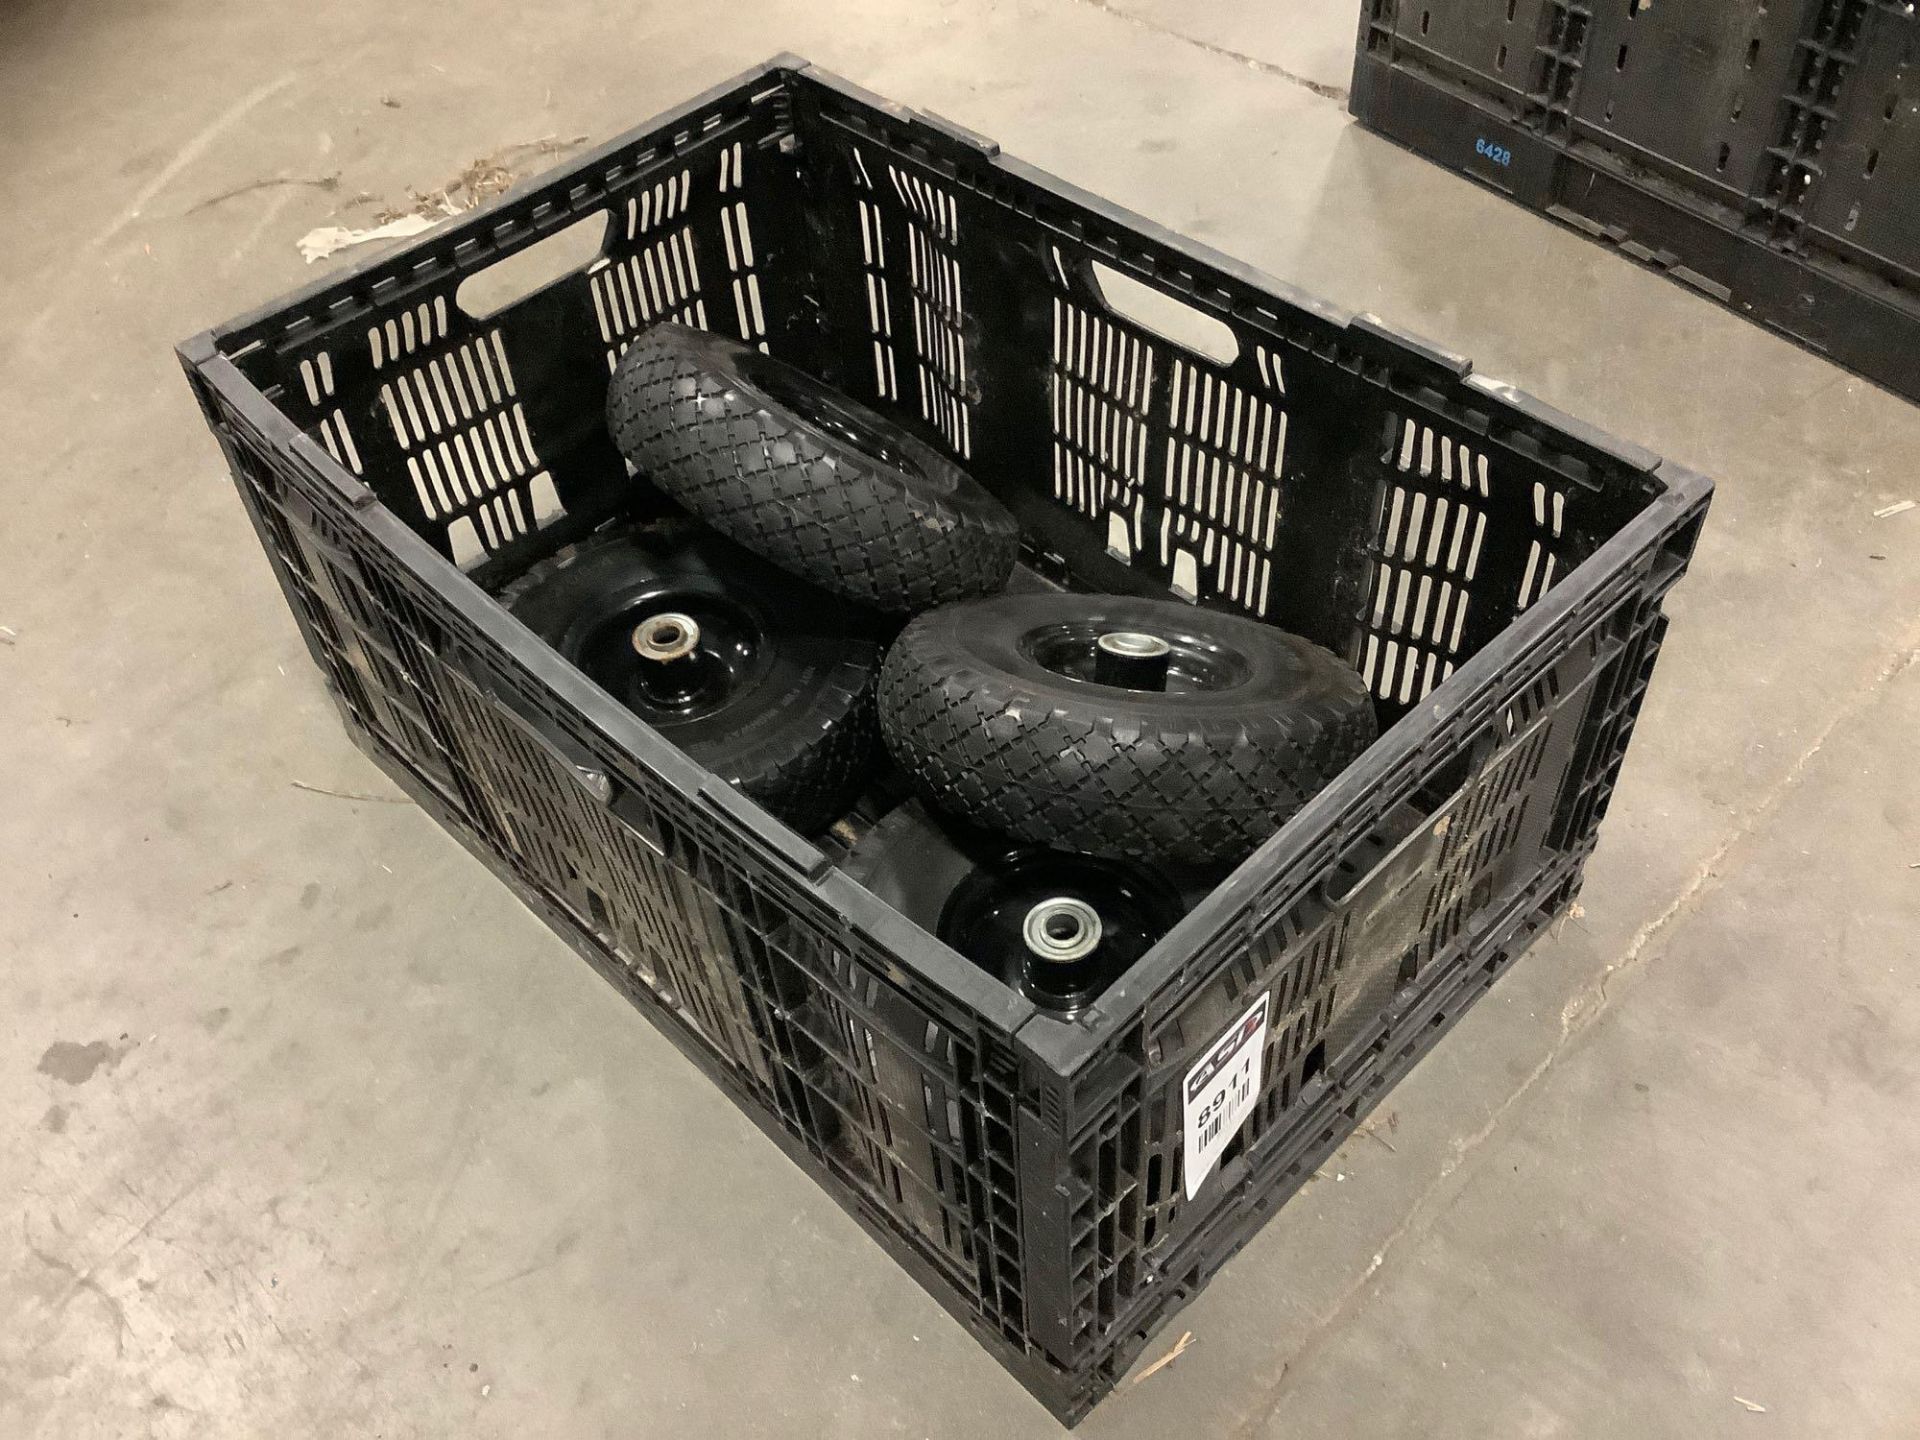 ( 4 ) UNUSED 10” SOLID TIRES 3.00-4 (260 x 85 ) WITH CARRYING CRATE - Image 3 of 3